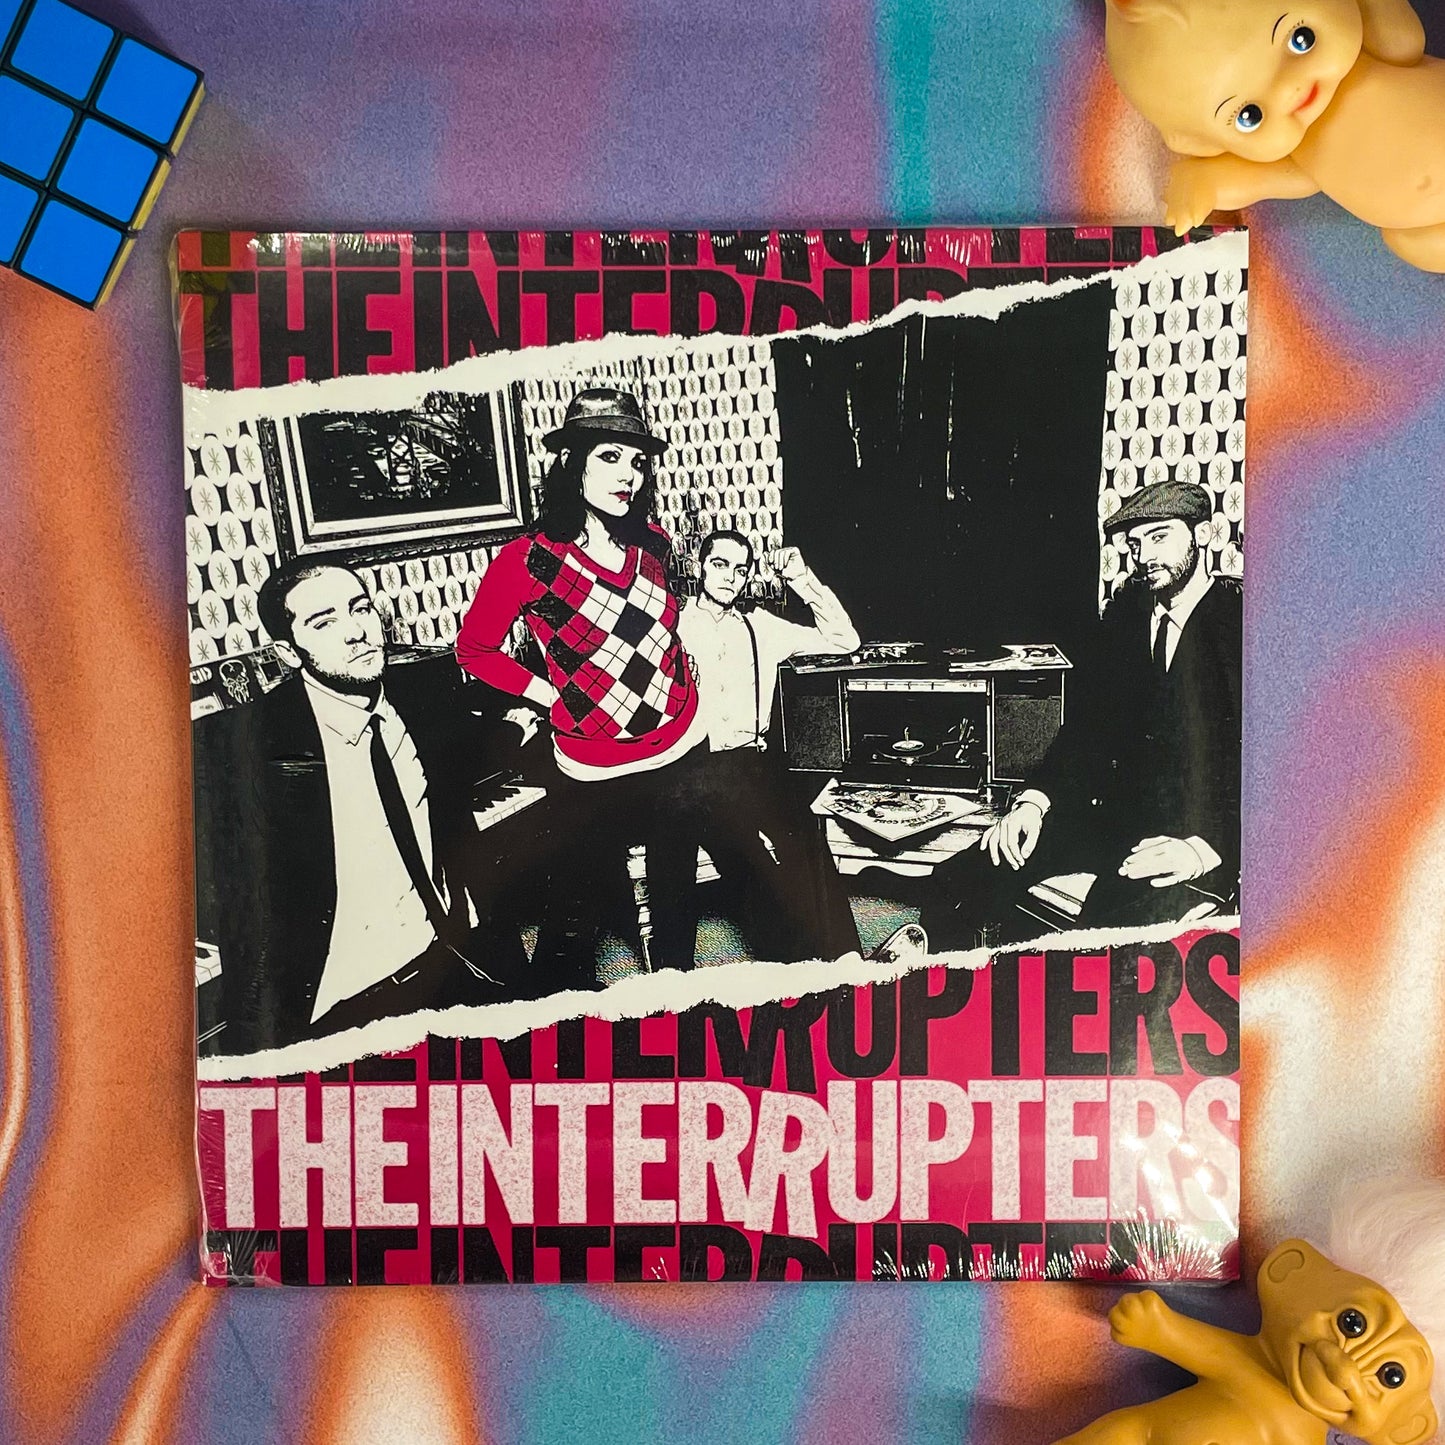 THE INTERRUPTERS - THE INTERRUPTERS